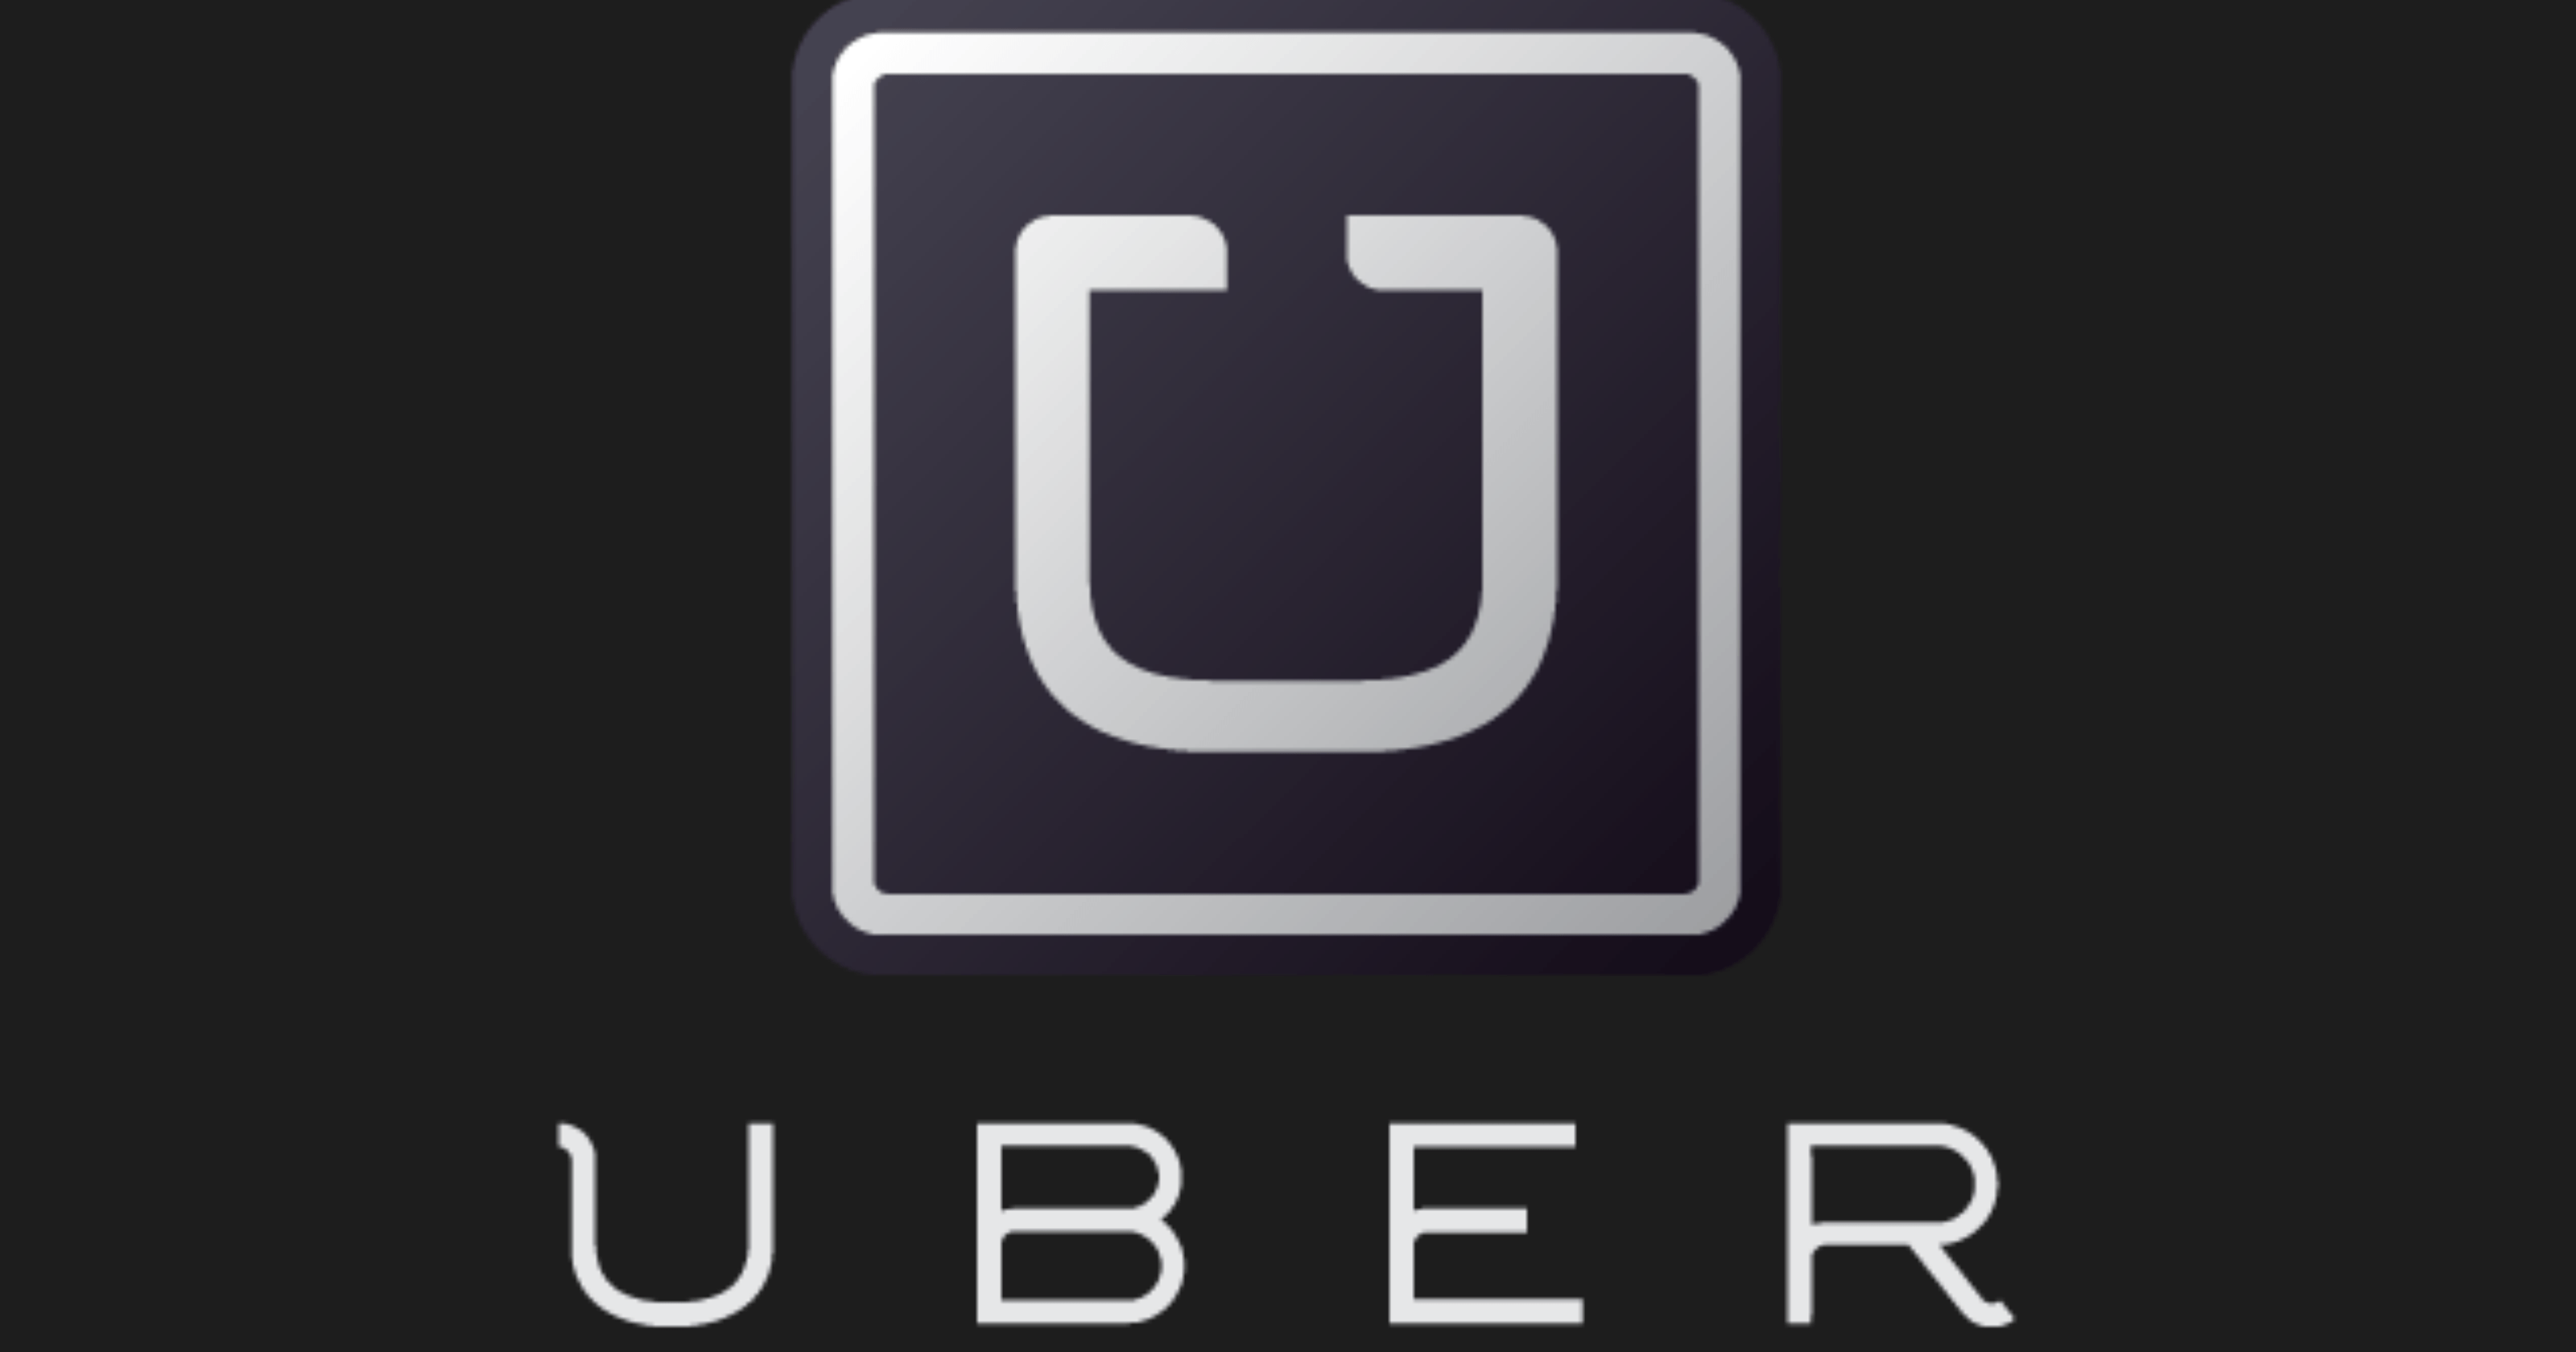 UberCab Logo - Uber vs. taxis: What's the difference?